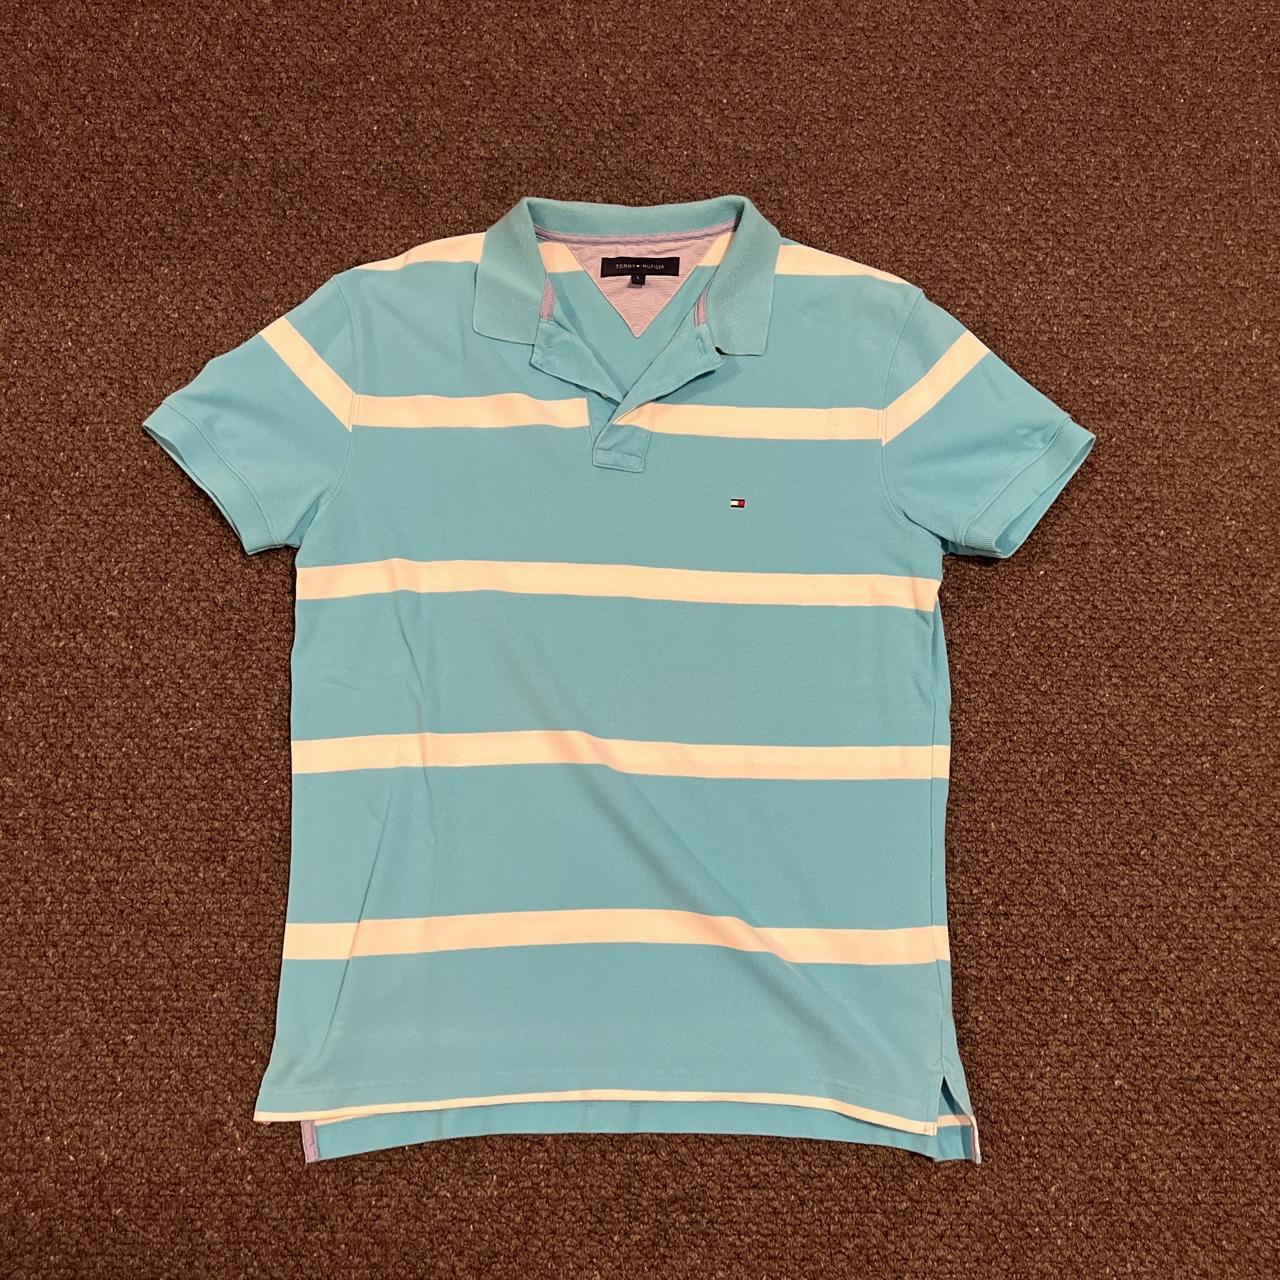 blue and white stripe polo shirt from Tommy Hilfiger - Depop